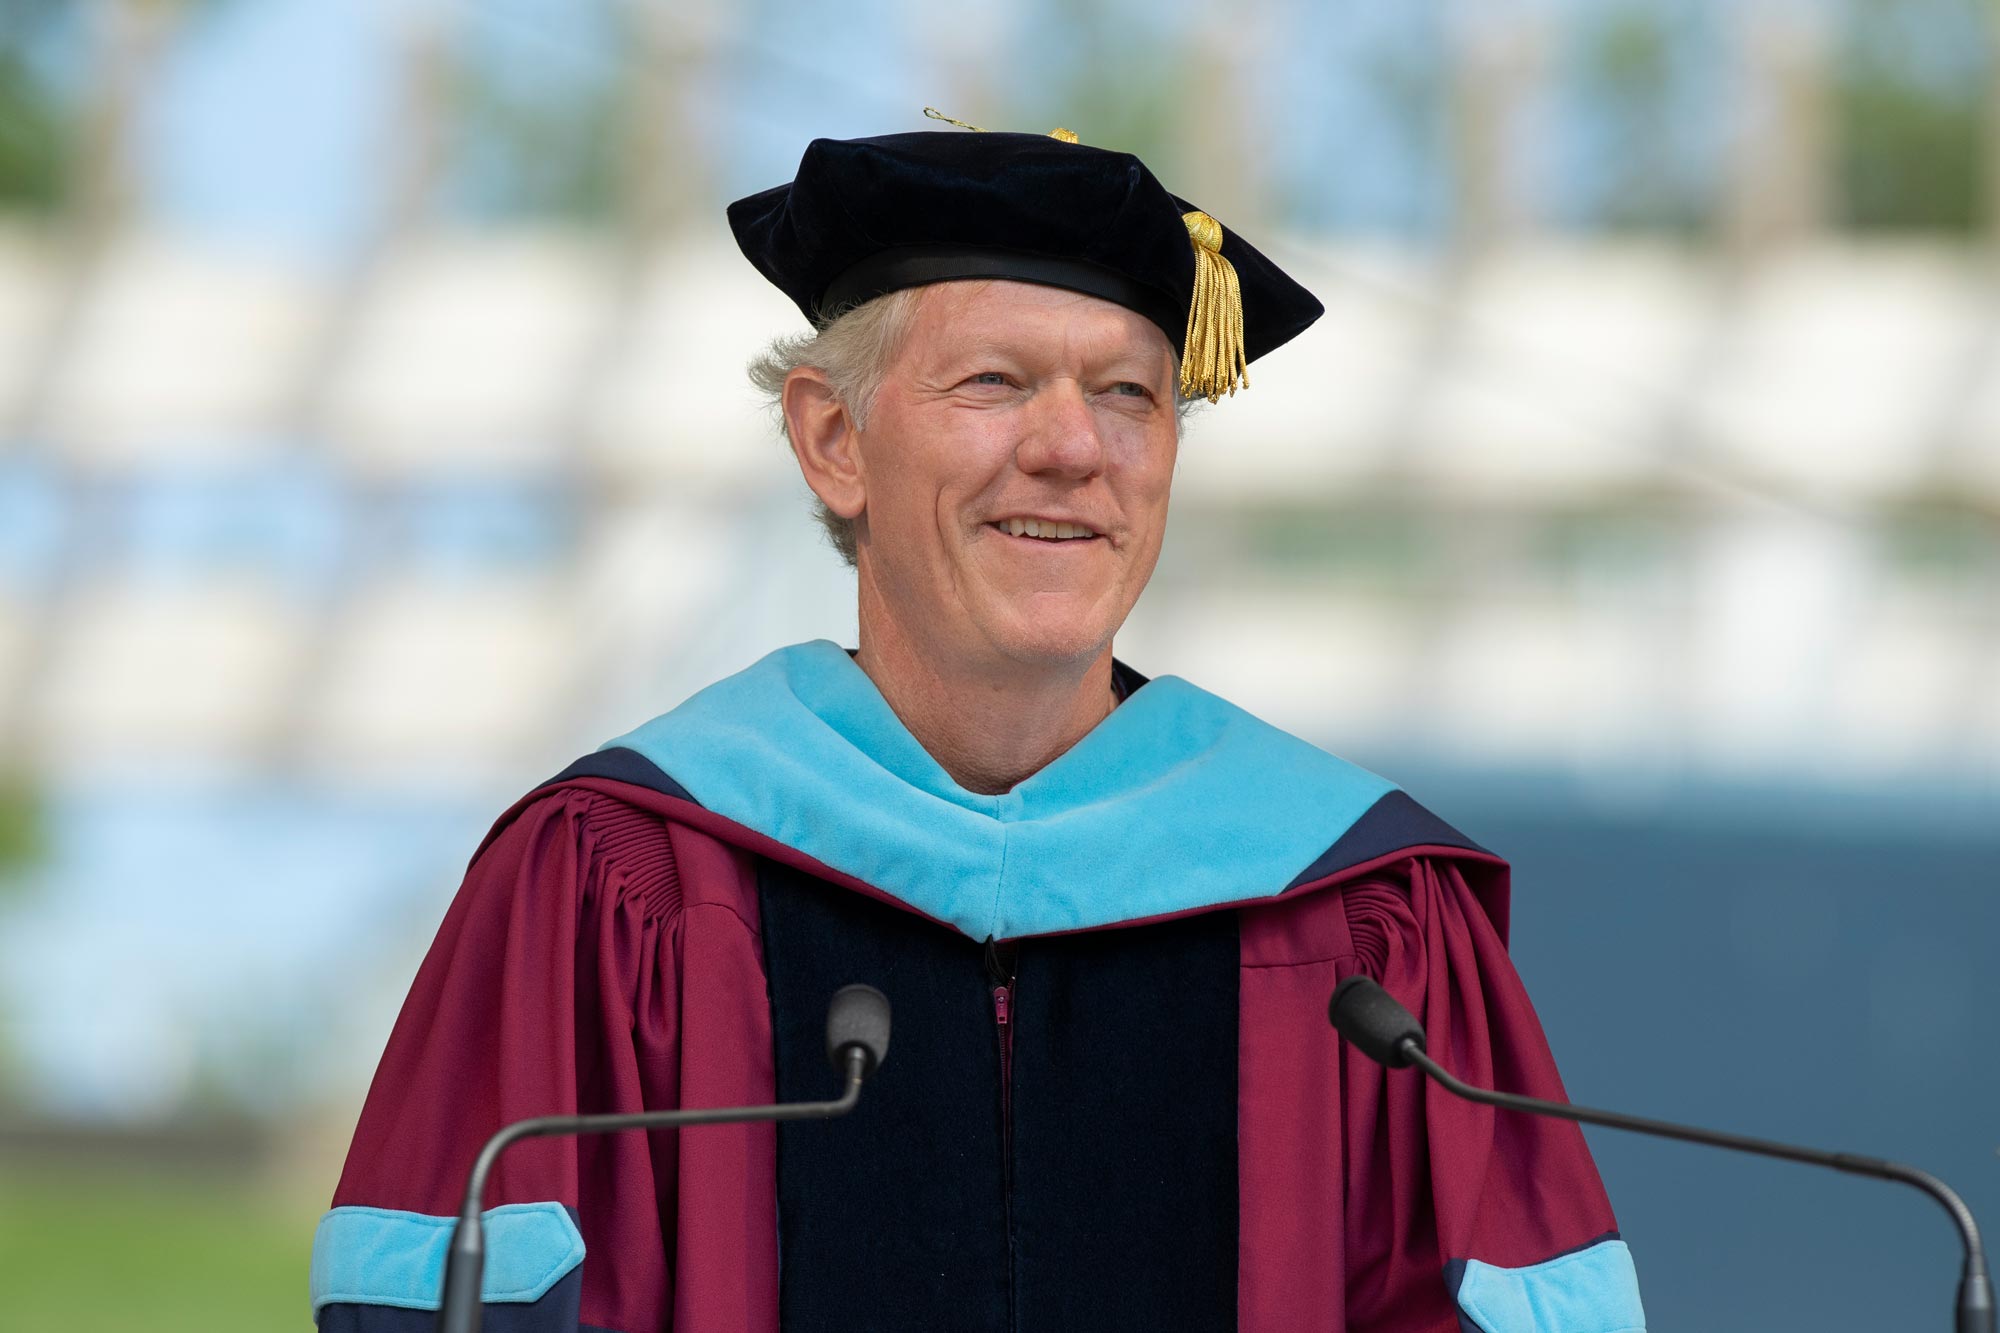 Scott Beardsley in gown and cap speaking at UVA Final Exercises in 2021